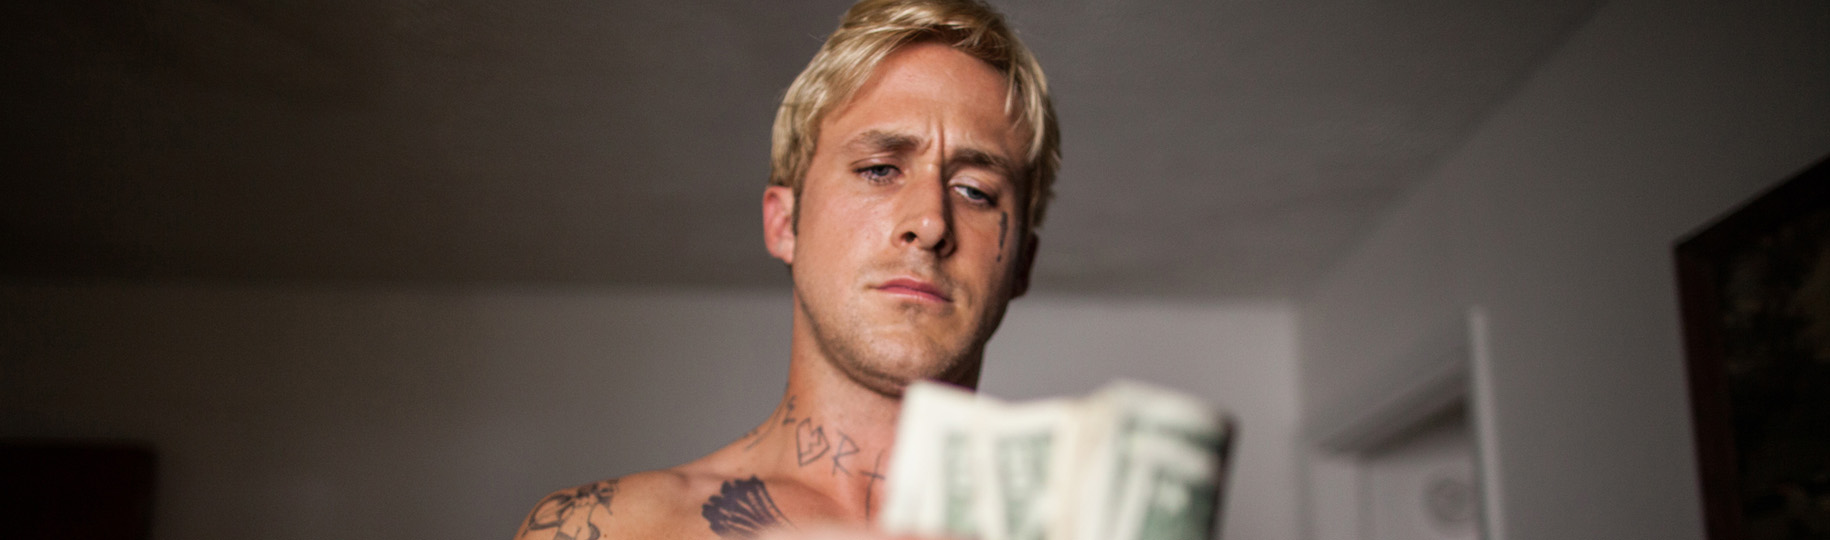 The Place beyond the Pines, Derek Cianfrance